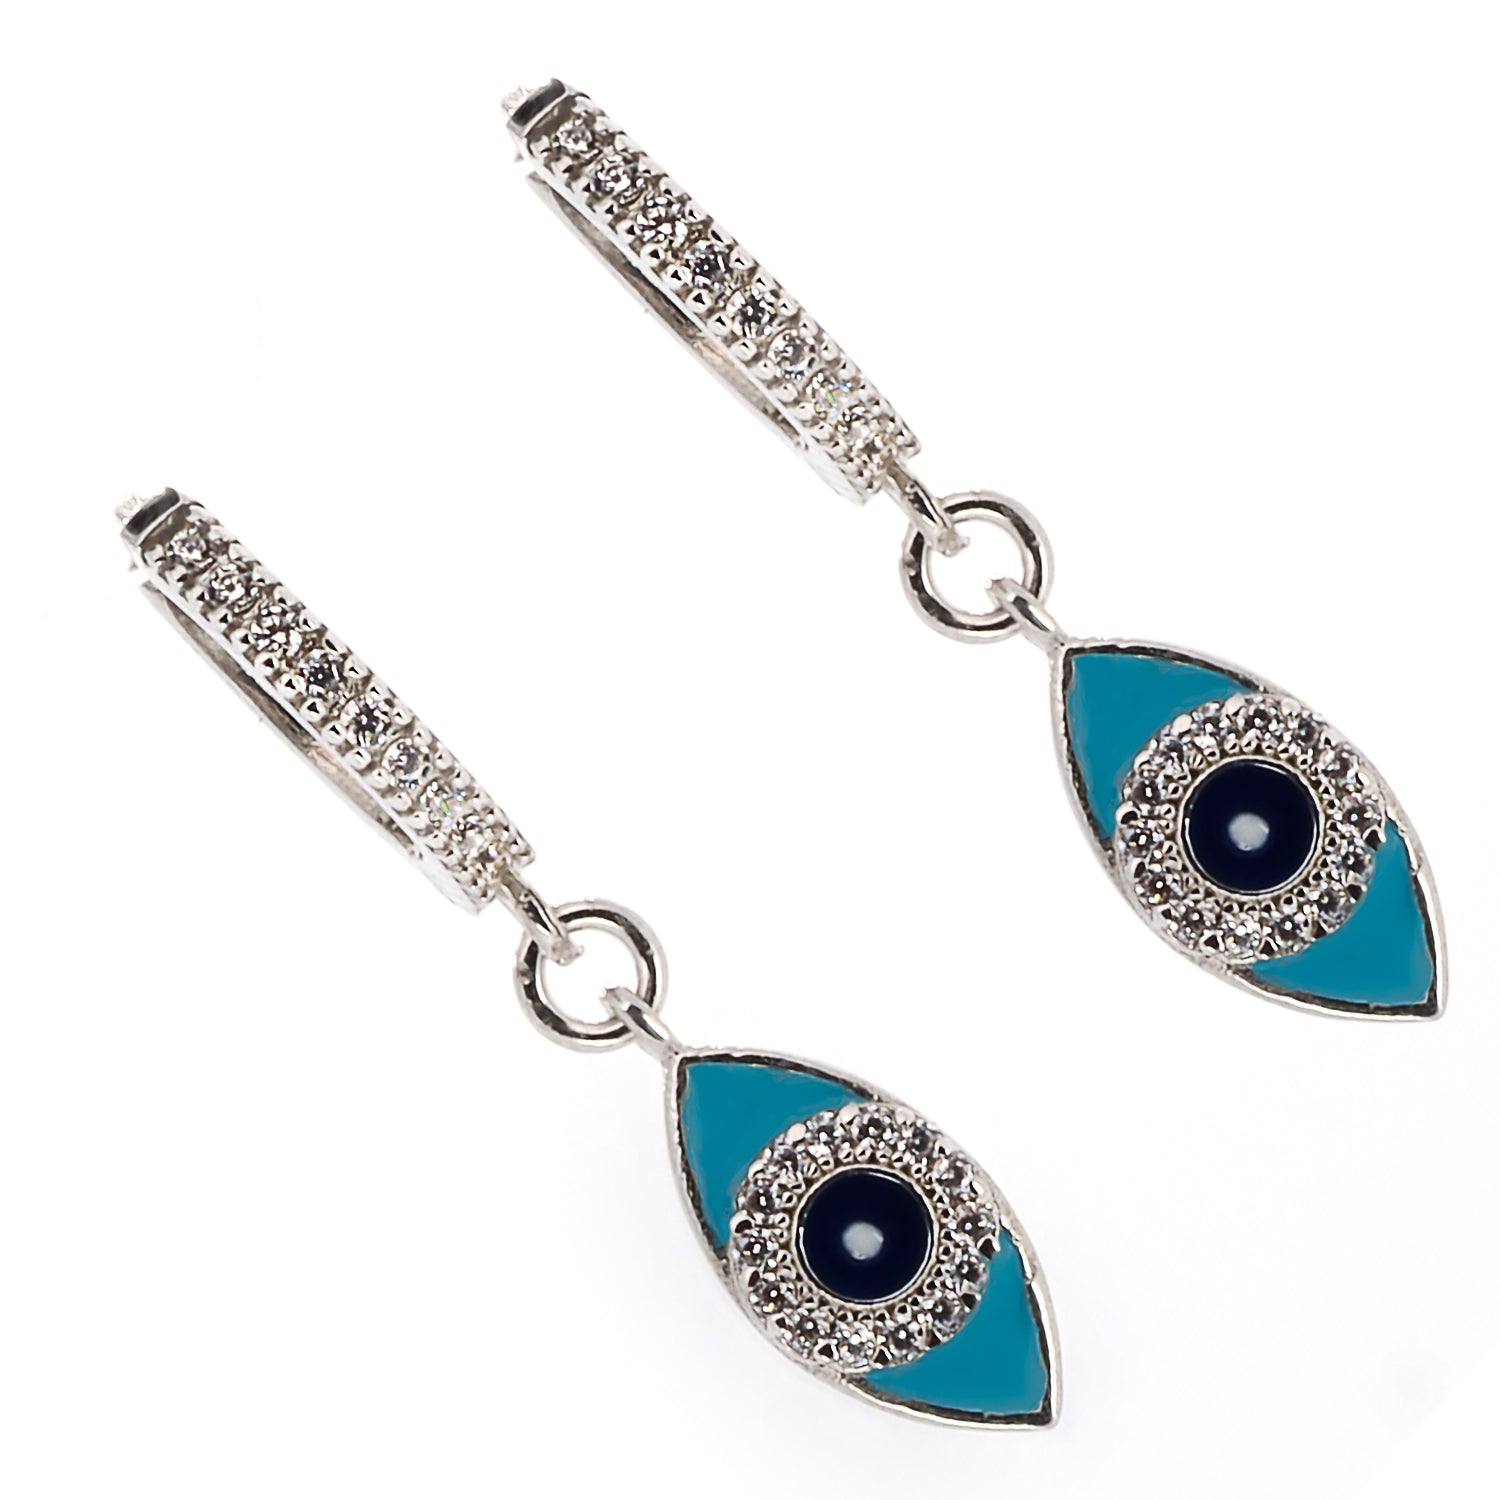 Protective Symbol - Embrace the power of the Evil Eye with turquoise enamel accents